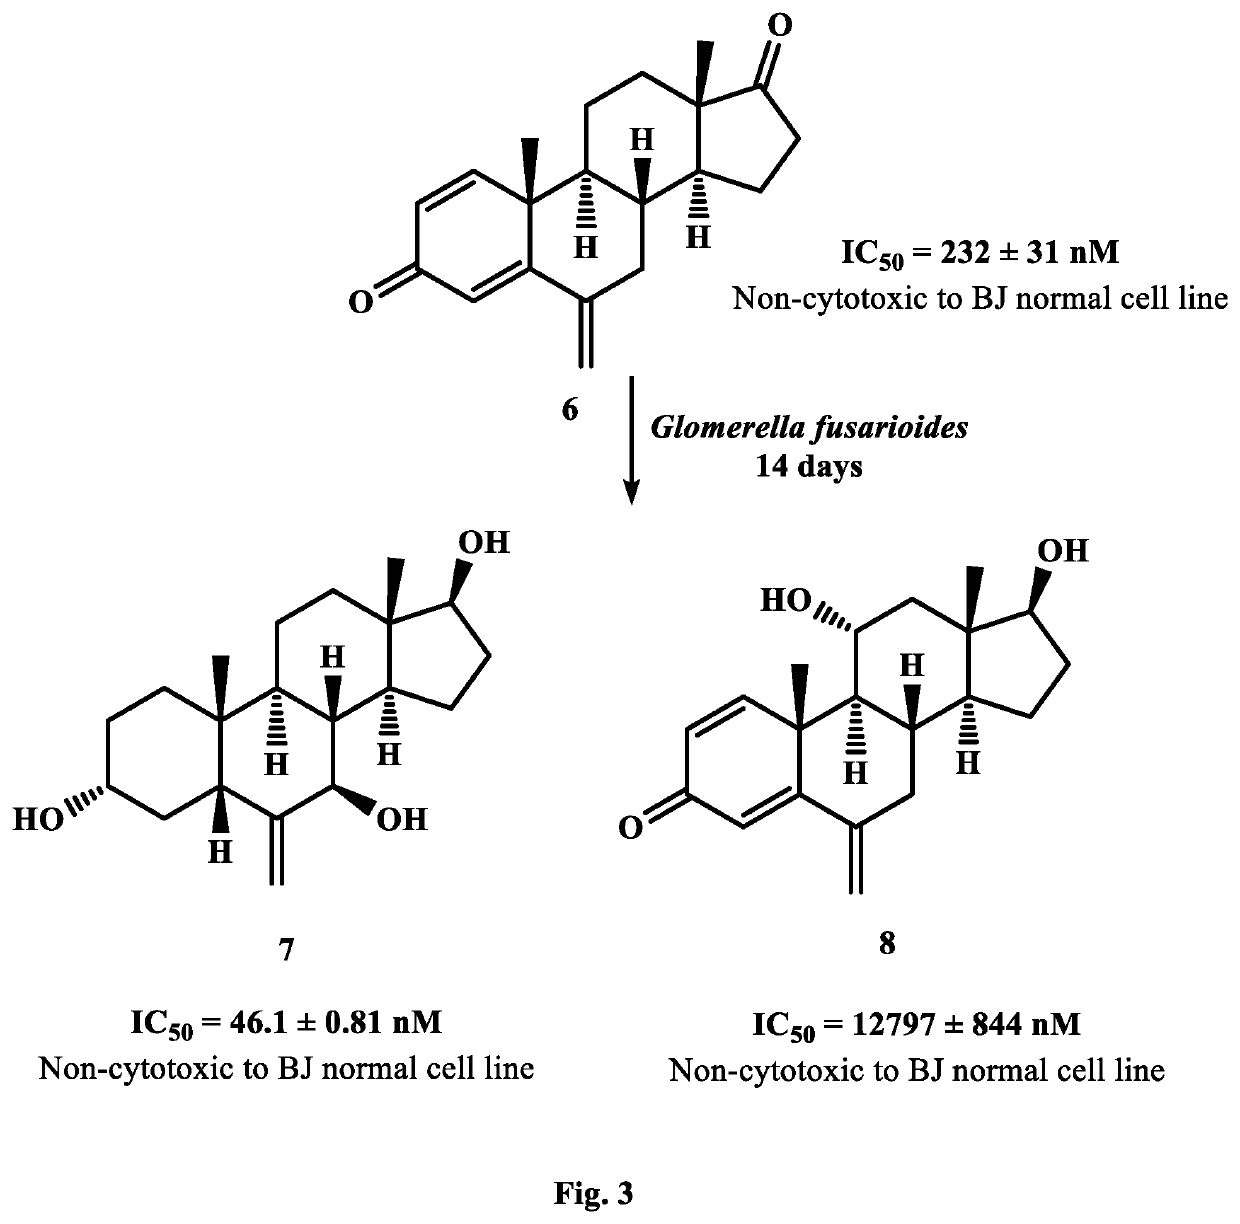 Synthesis of New Potent Aromatase Inhibitors Through Biocatalysis of Anti-Cancer Drugs, Atamestane, Drostanolone Enanthate, and Exemestane